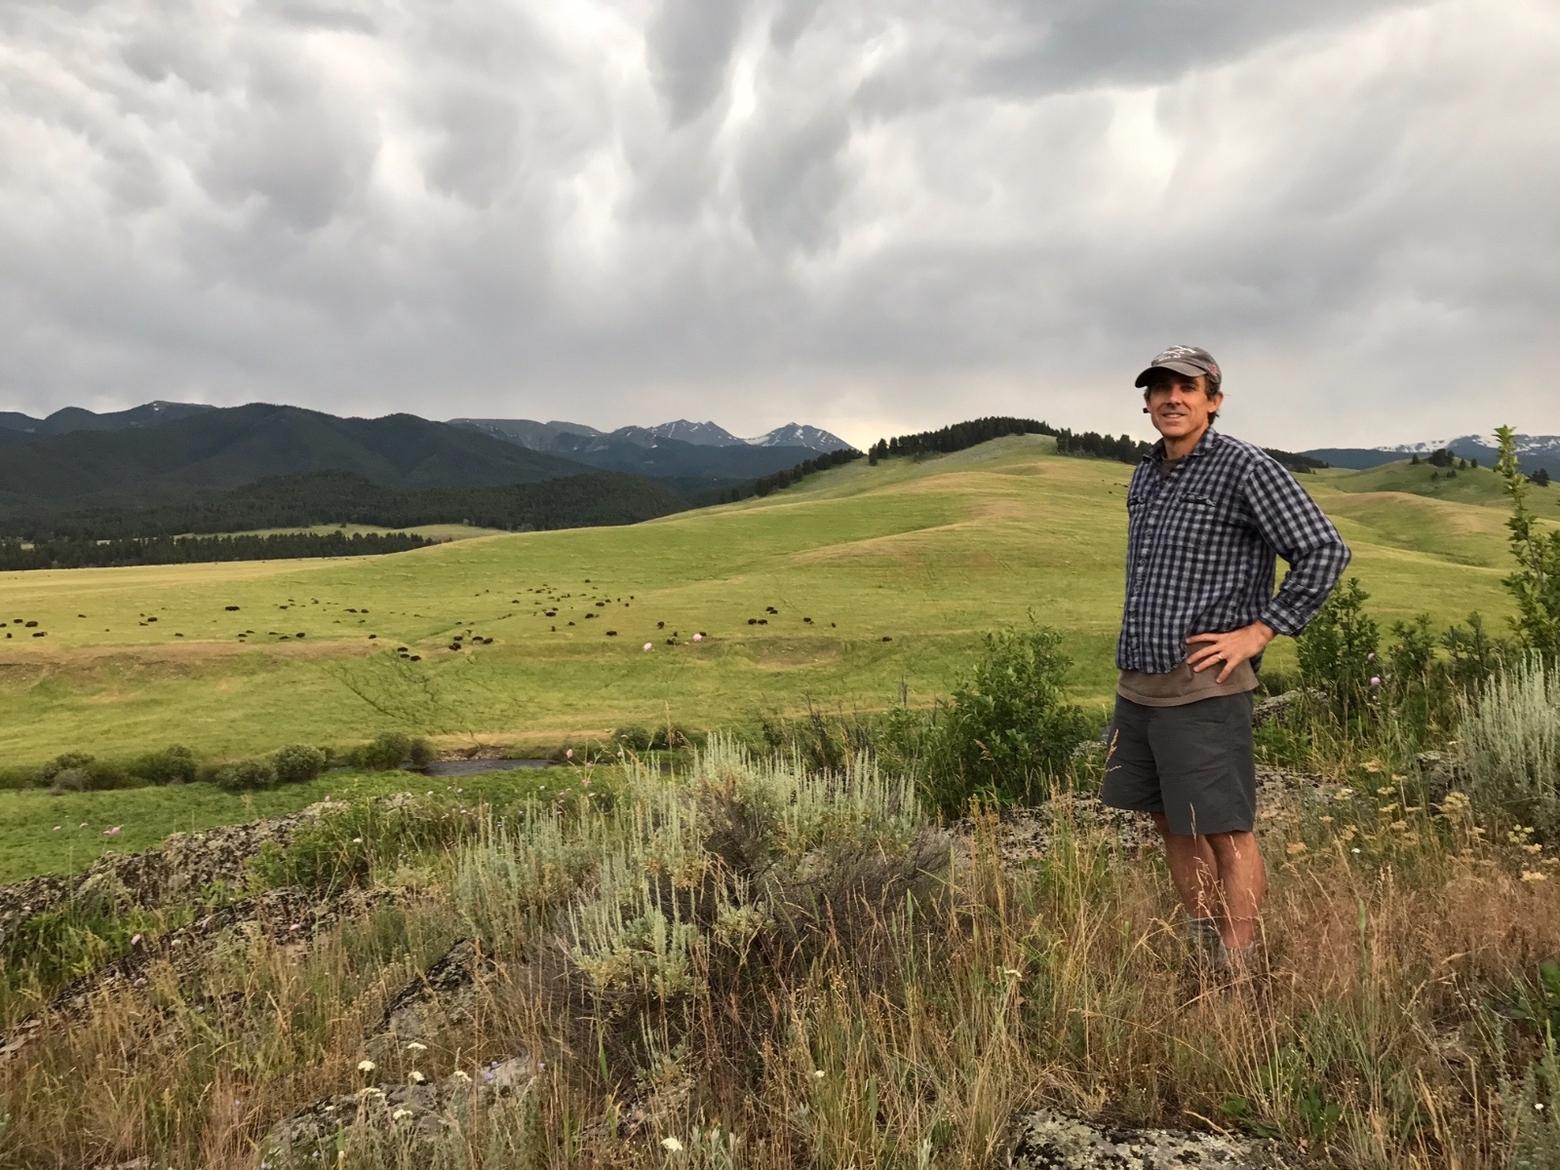 MoJo founder Todd Wilkinson scouting a Greater Yellowstone bison herd as a storm brews above.  Photo by Thomas D. Mangelsen